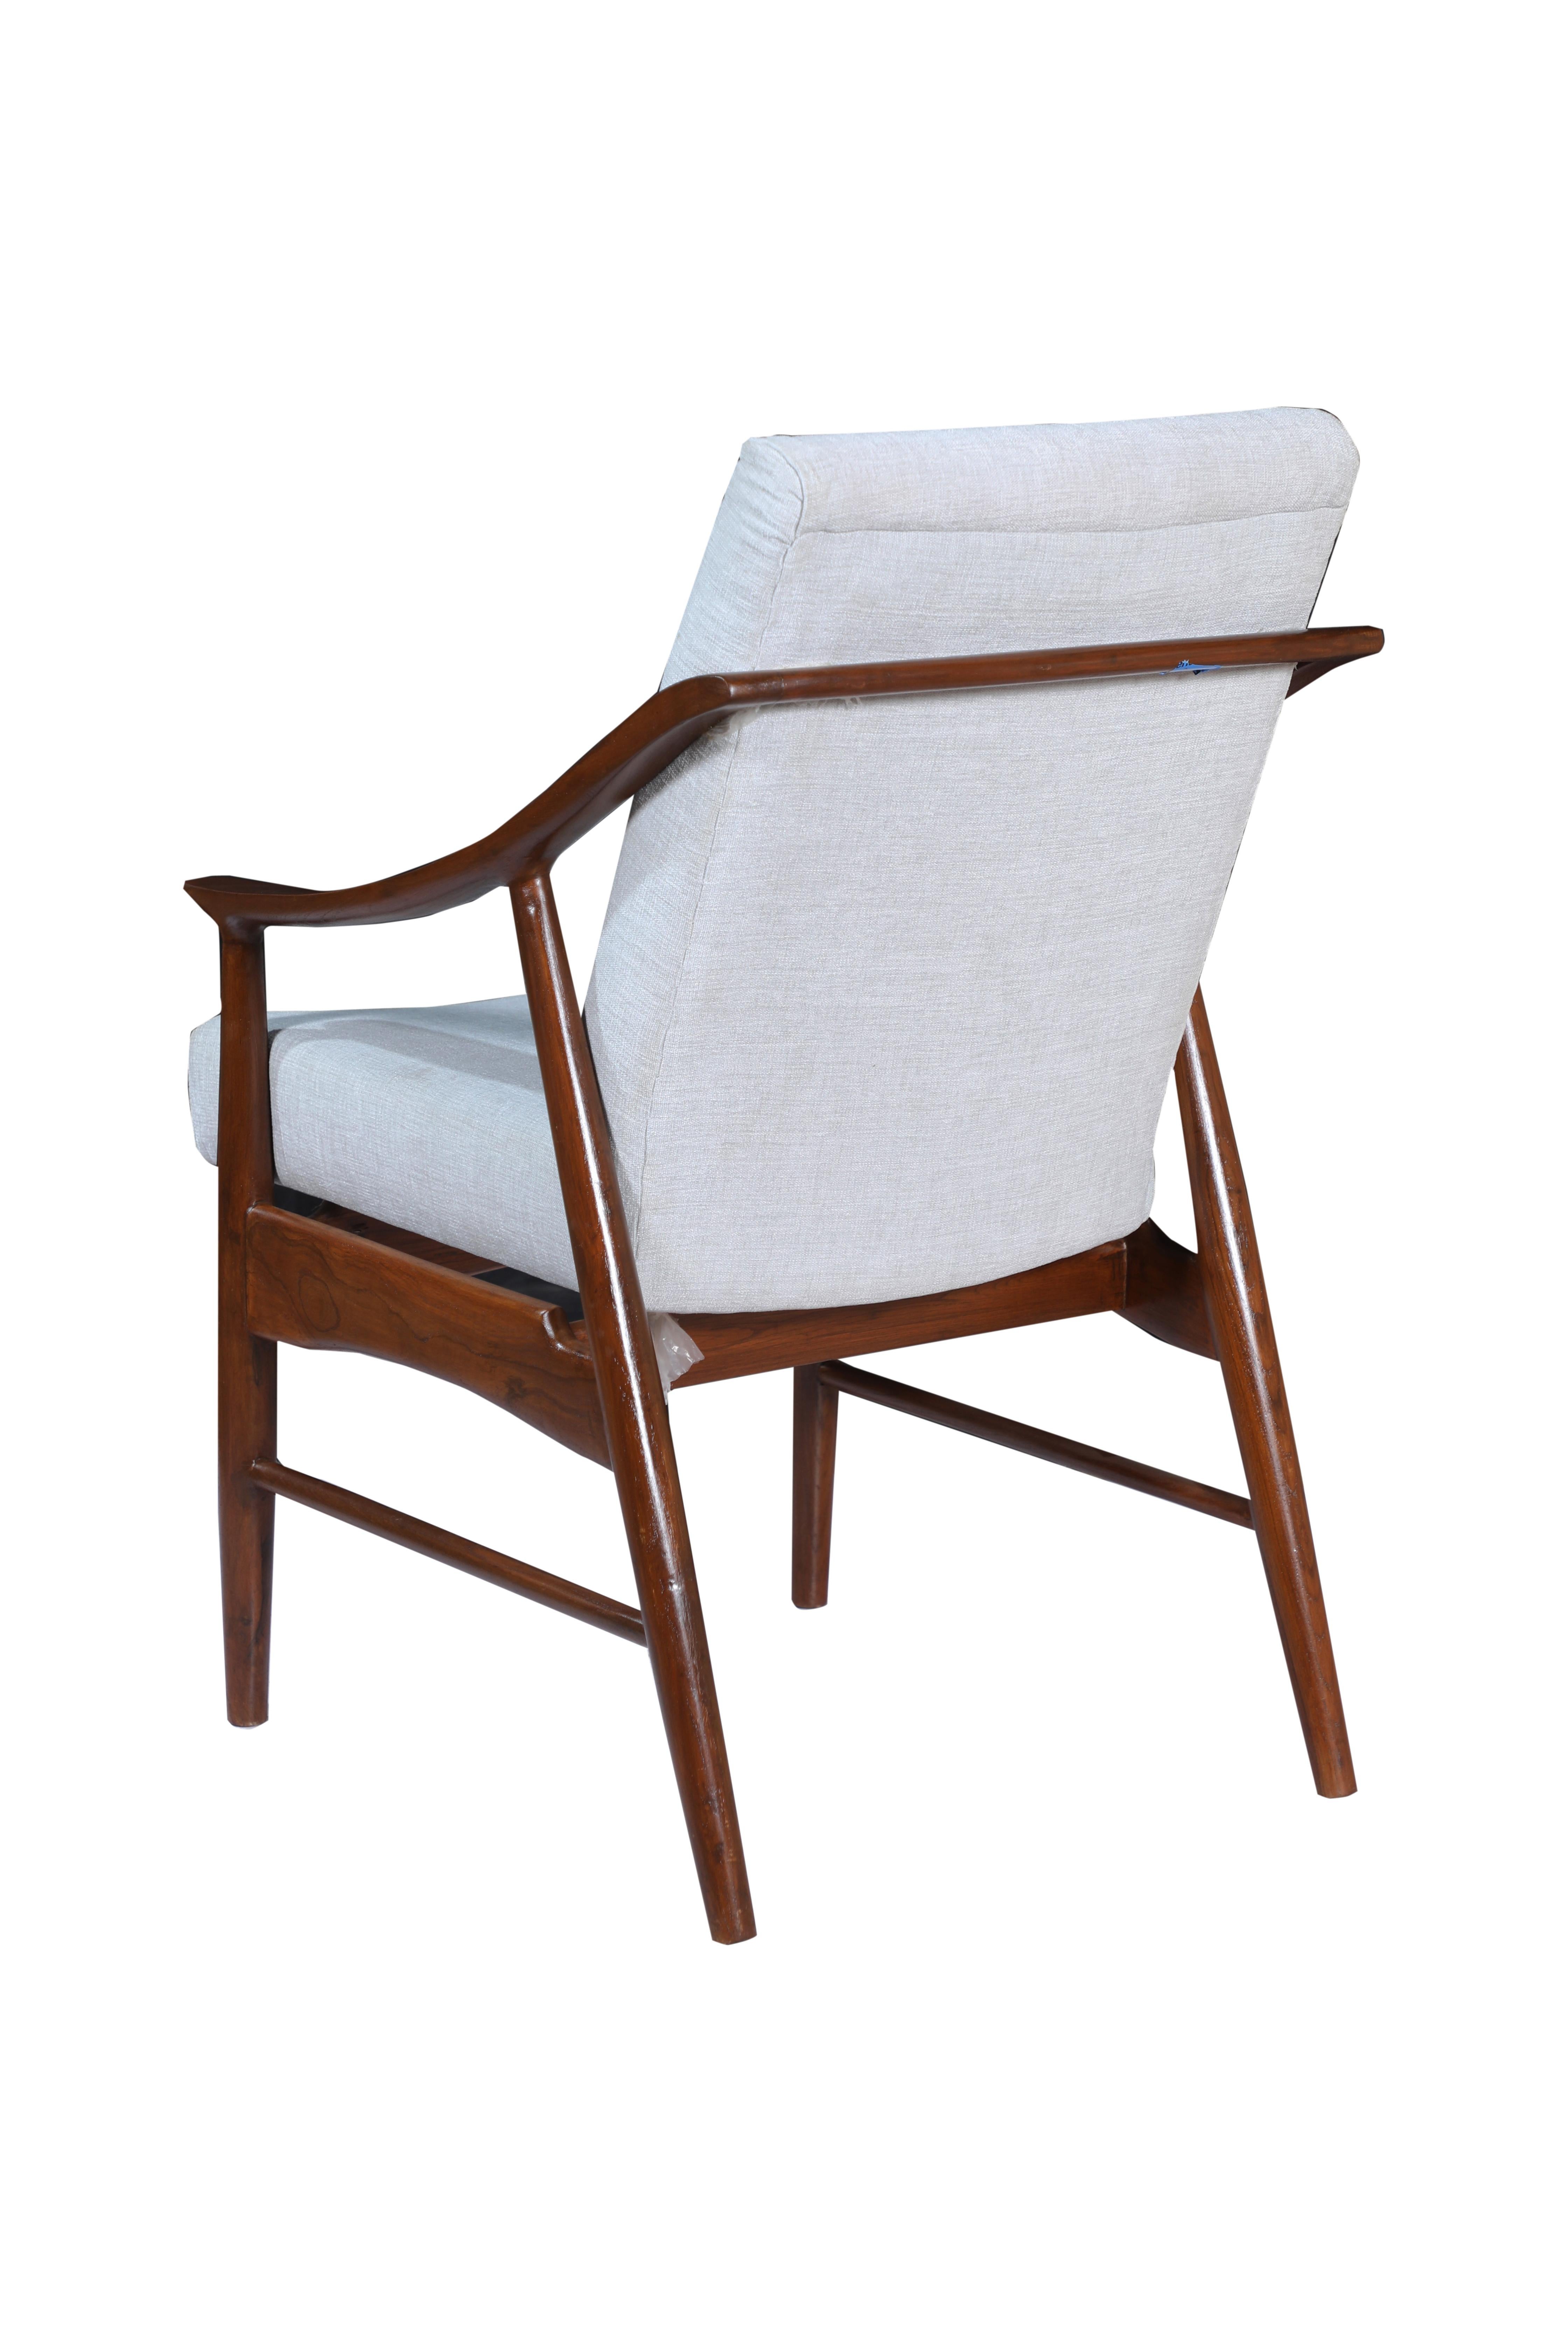 Pair of Mid-Century Modern Danish Teak Side Armchairs In Good Condition For Sale In Nantucket, MA